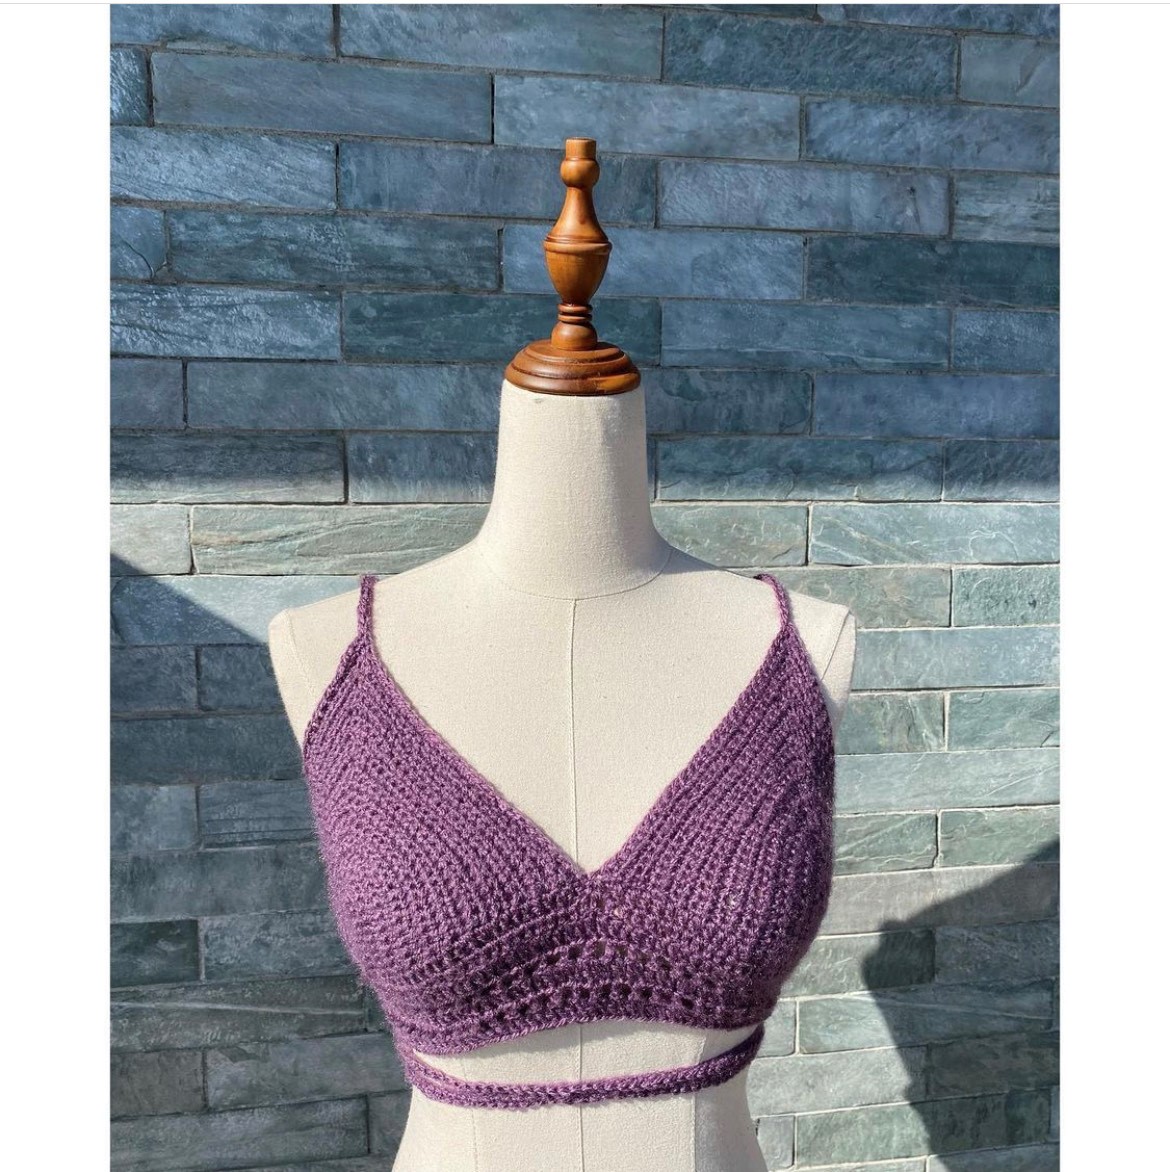 Halter Top from Primordial image_preview 